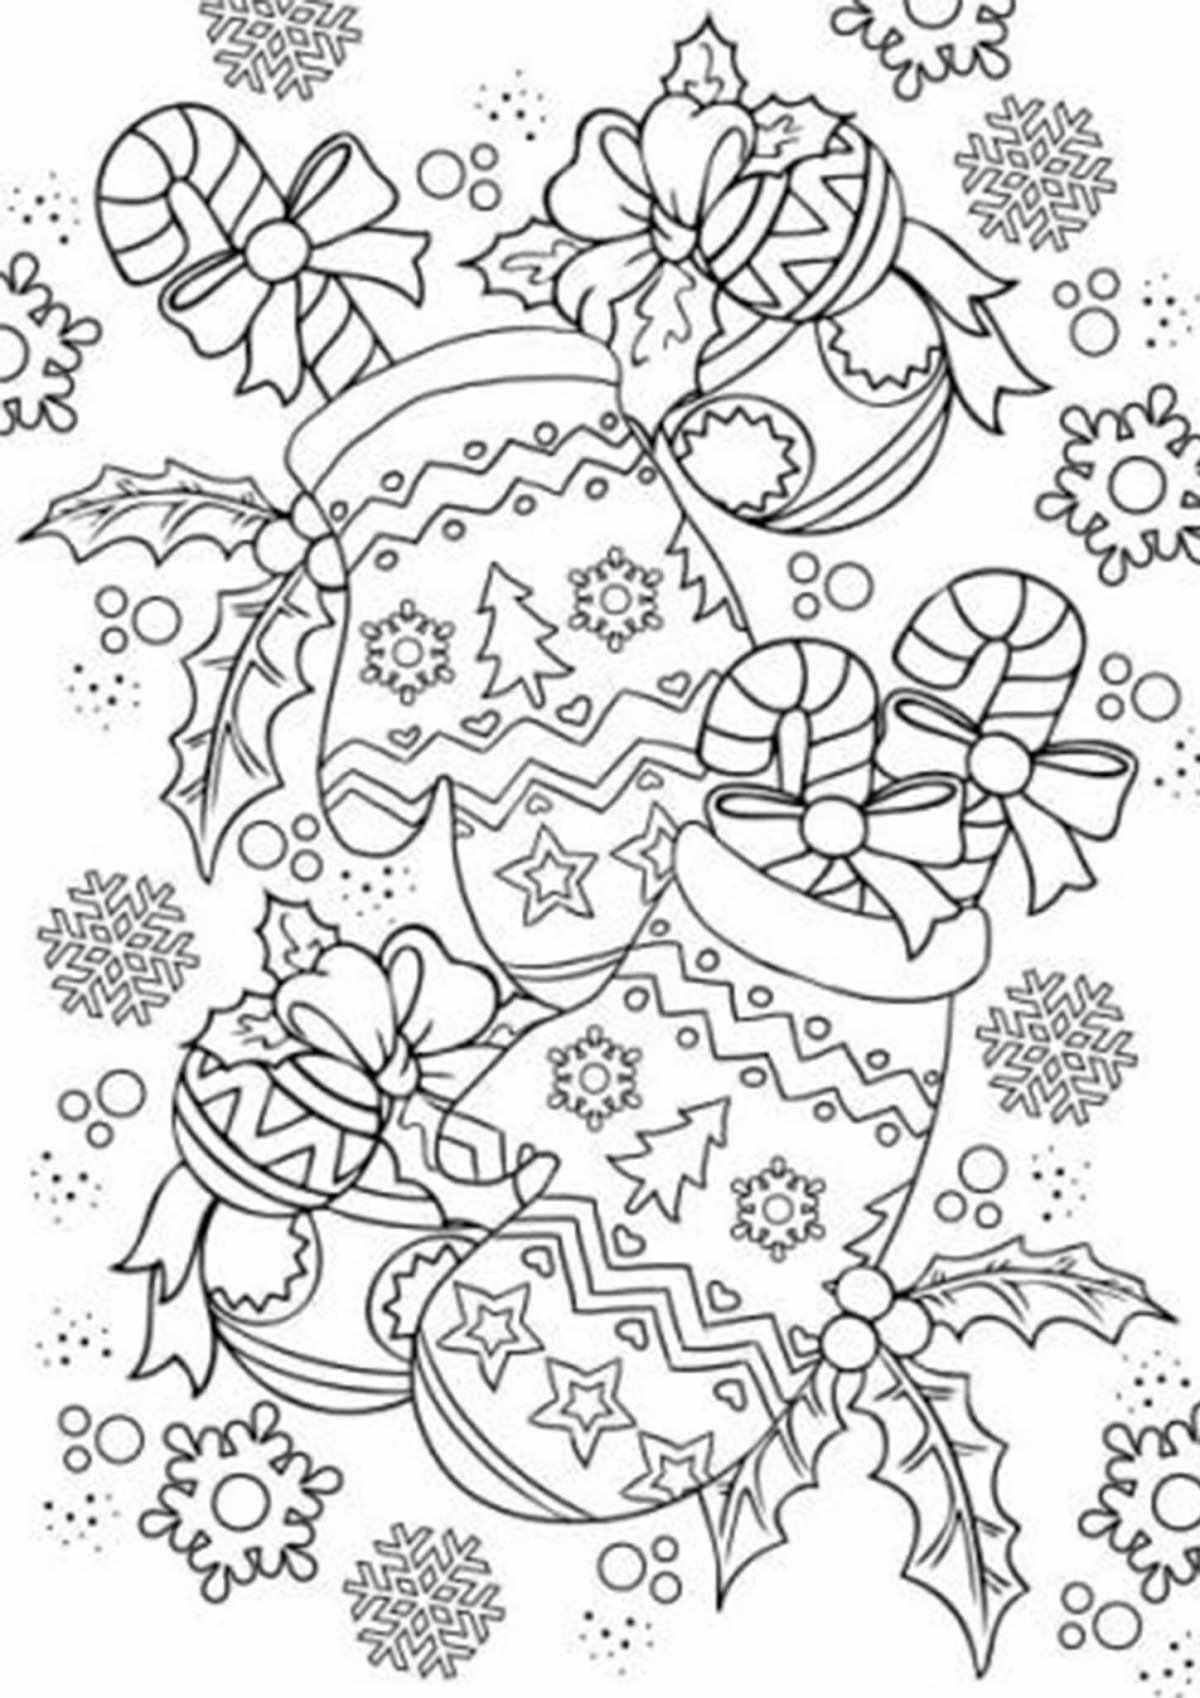 Fun coloring pages with Christmas patterns